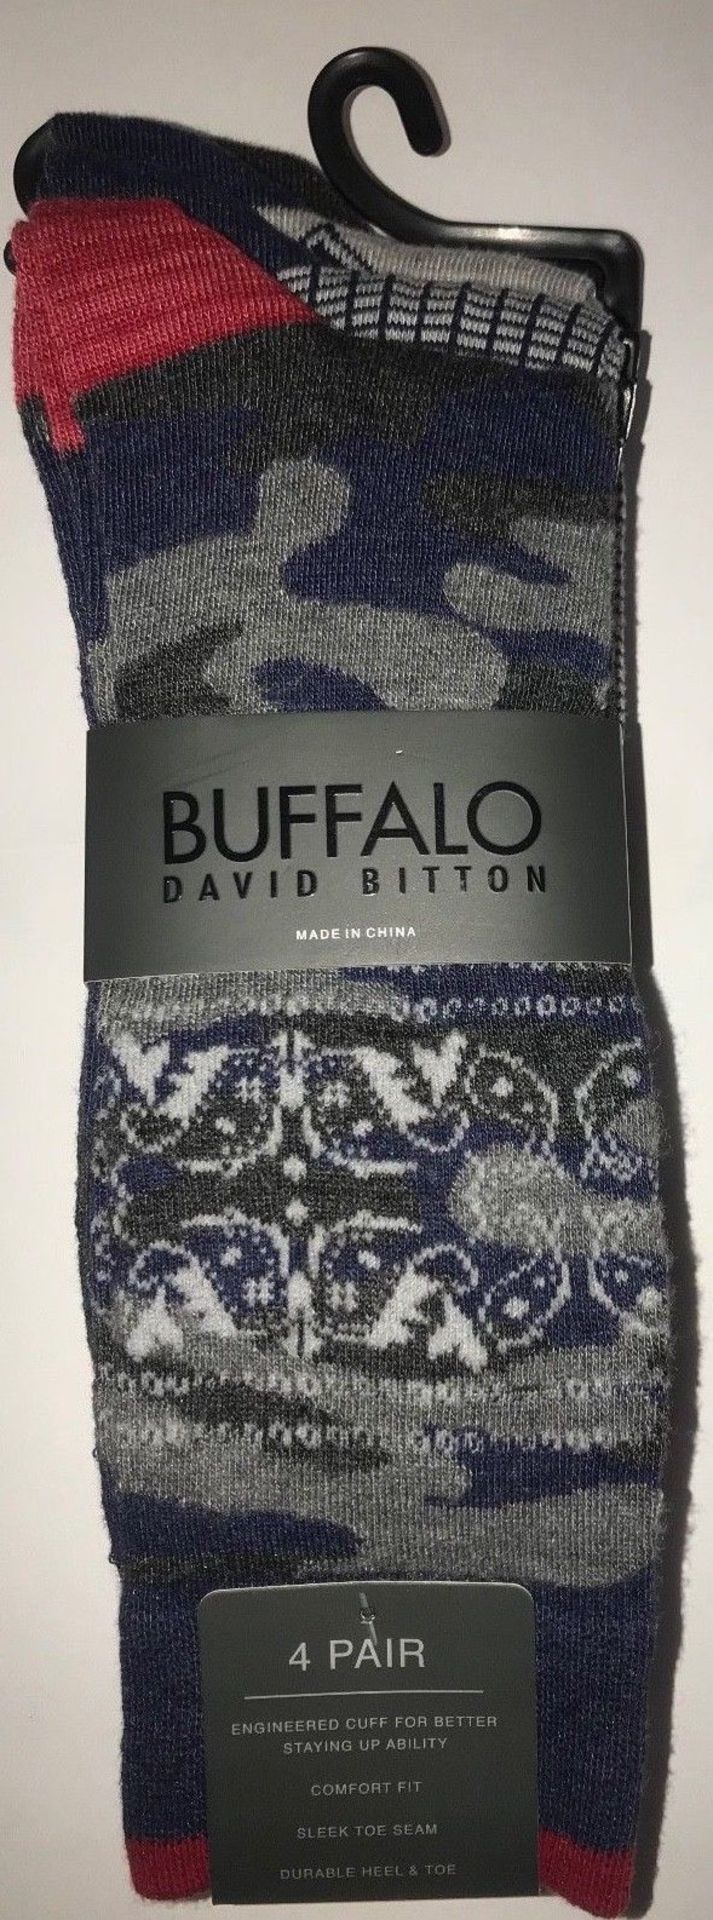 34 X 4 PACKS OF BUFFALO DAVID BITTON CREW SOCKS THESE SOCKS SELL AT THE BUFFALO STORES FOR $29.95